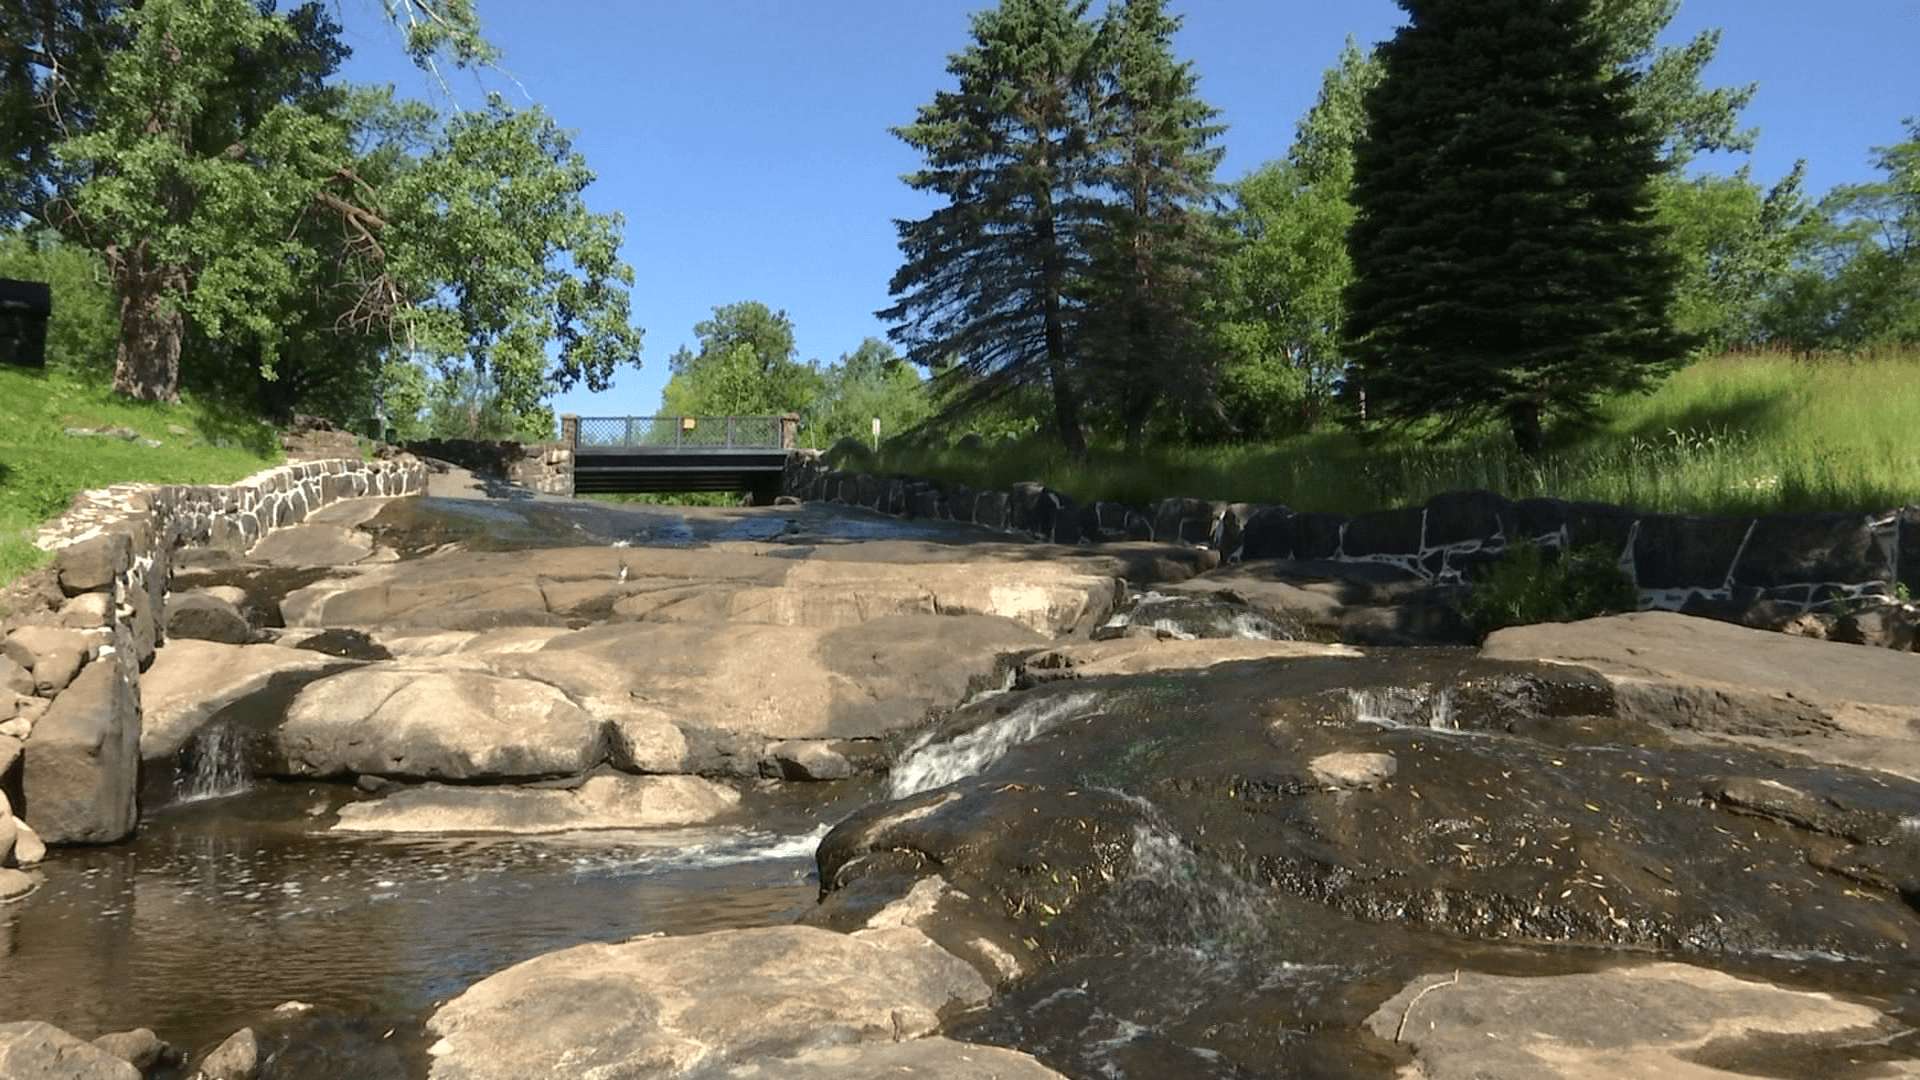 The creek in the Lincoln Park Area.